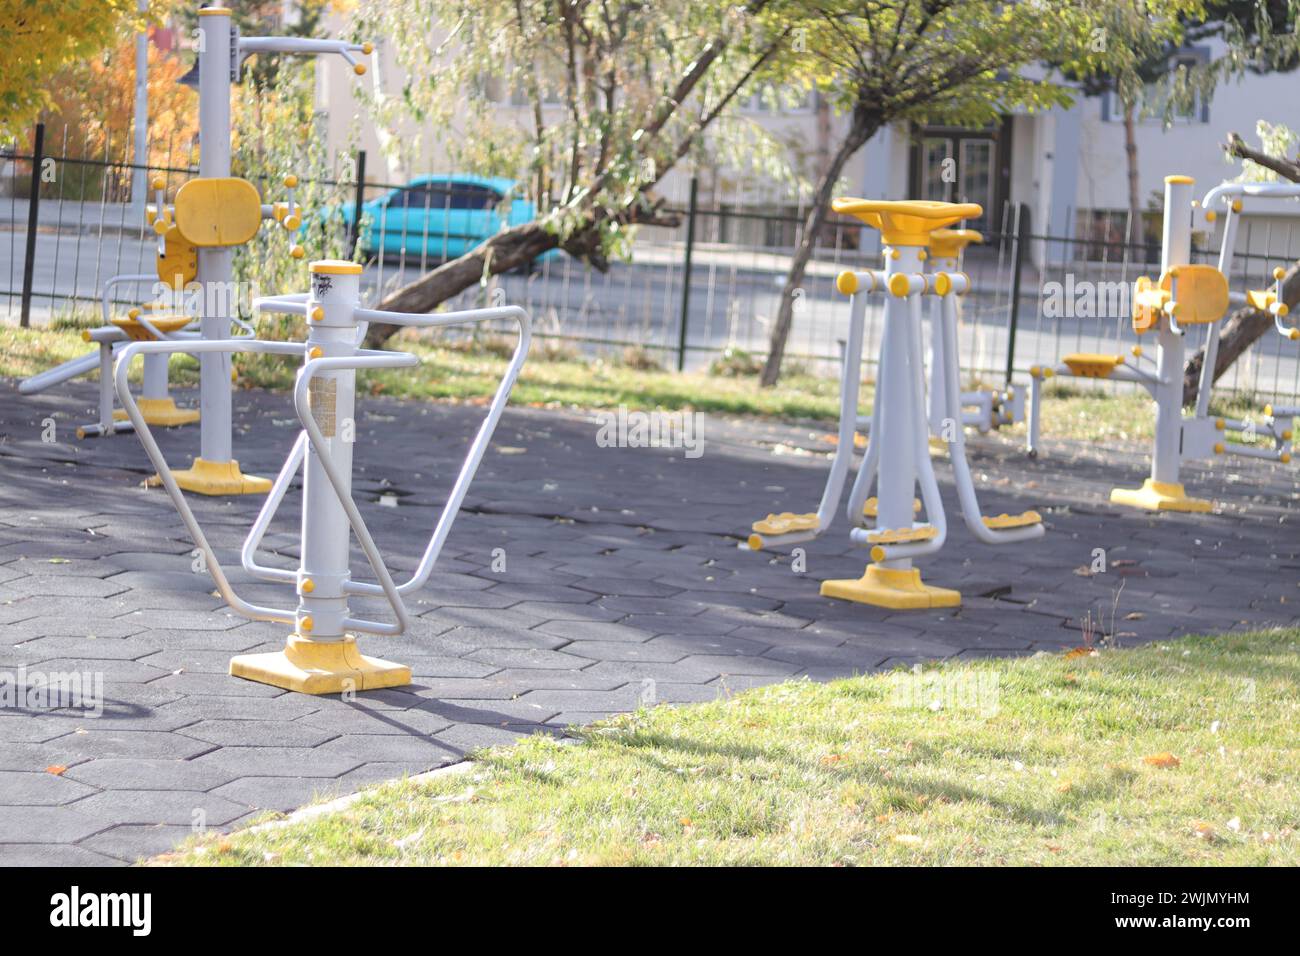 Depicts a public park equipped with various outdoor gym equipment pieces, promoting a healthy lifestyle. Stock Photo